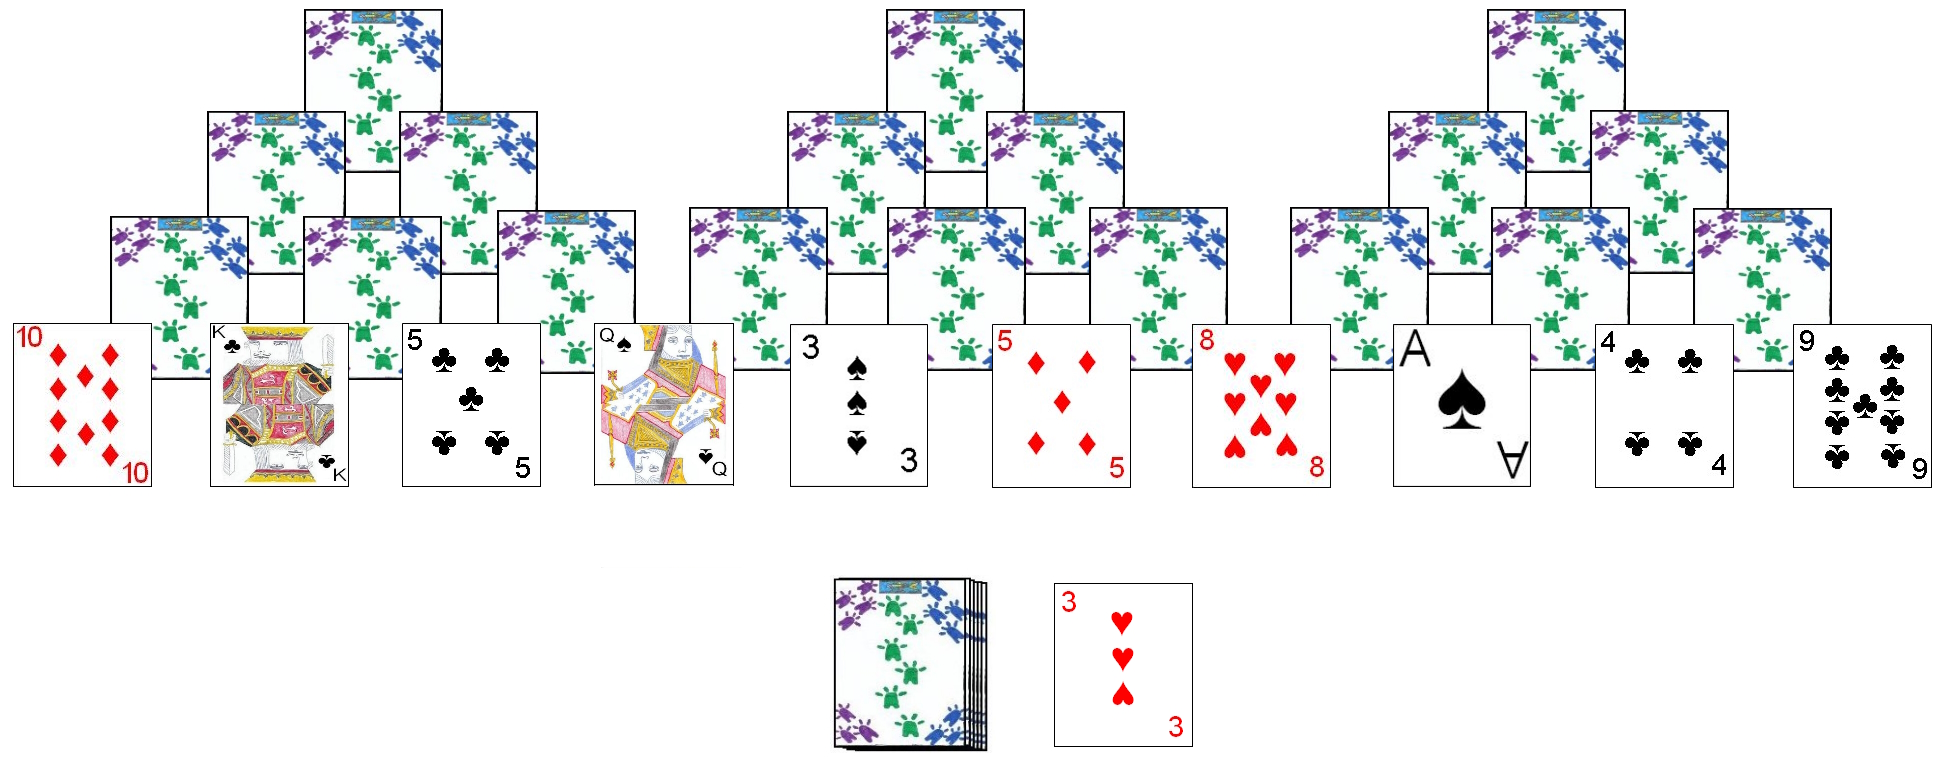 Example initial setup for Pyramid Solitaire